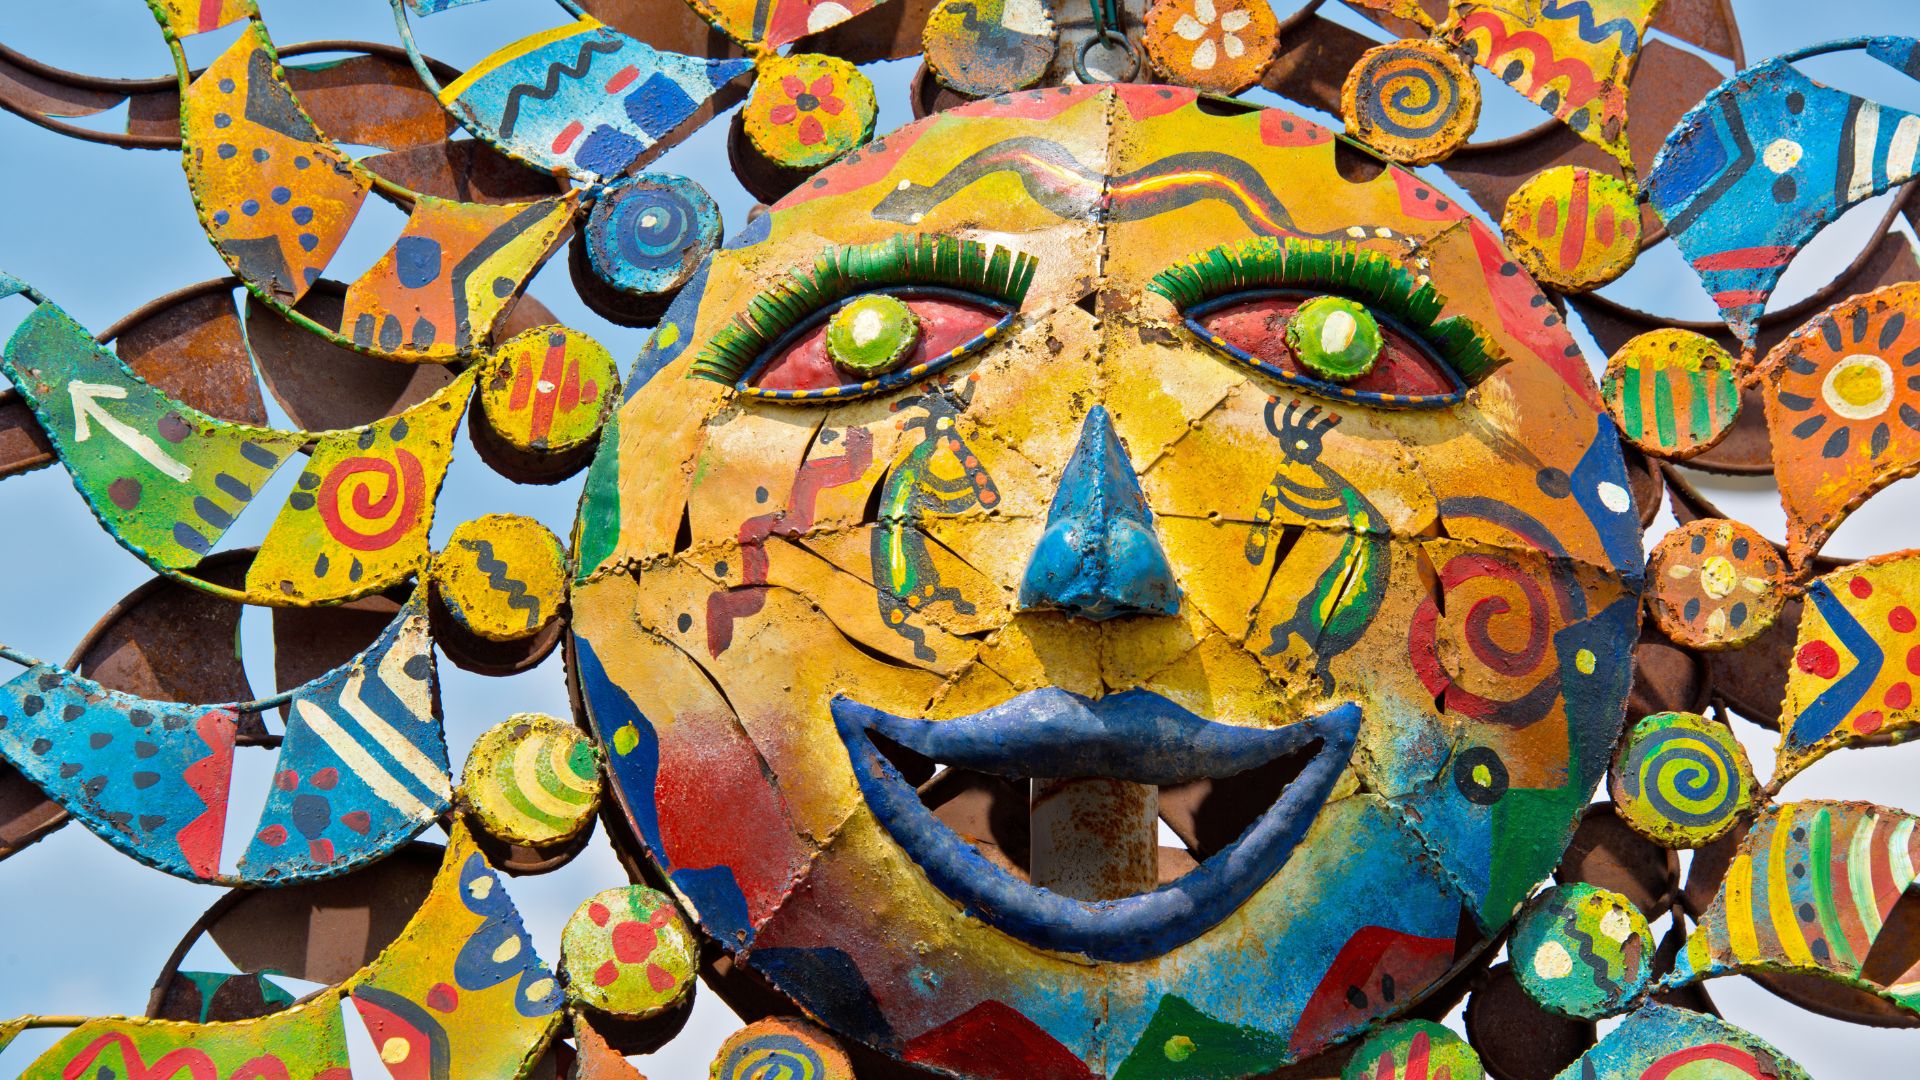 Large, colorful folk art display of a giant sun.